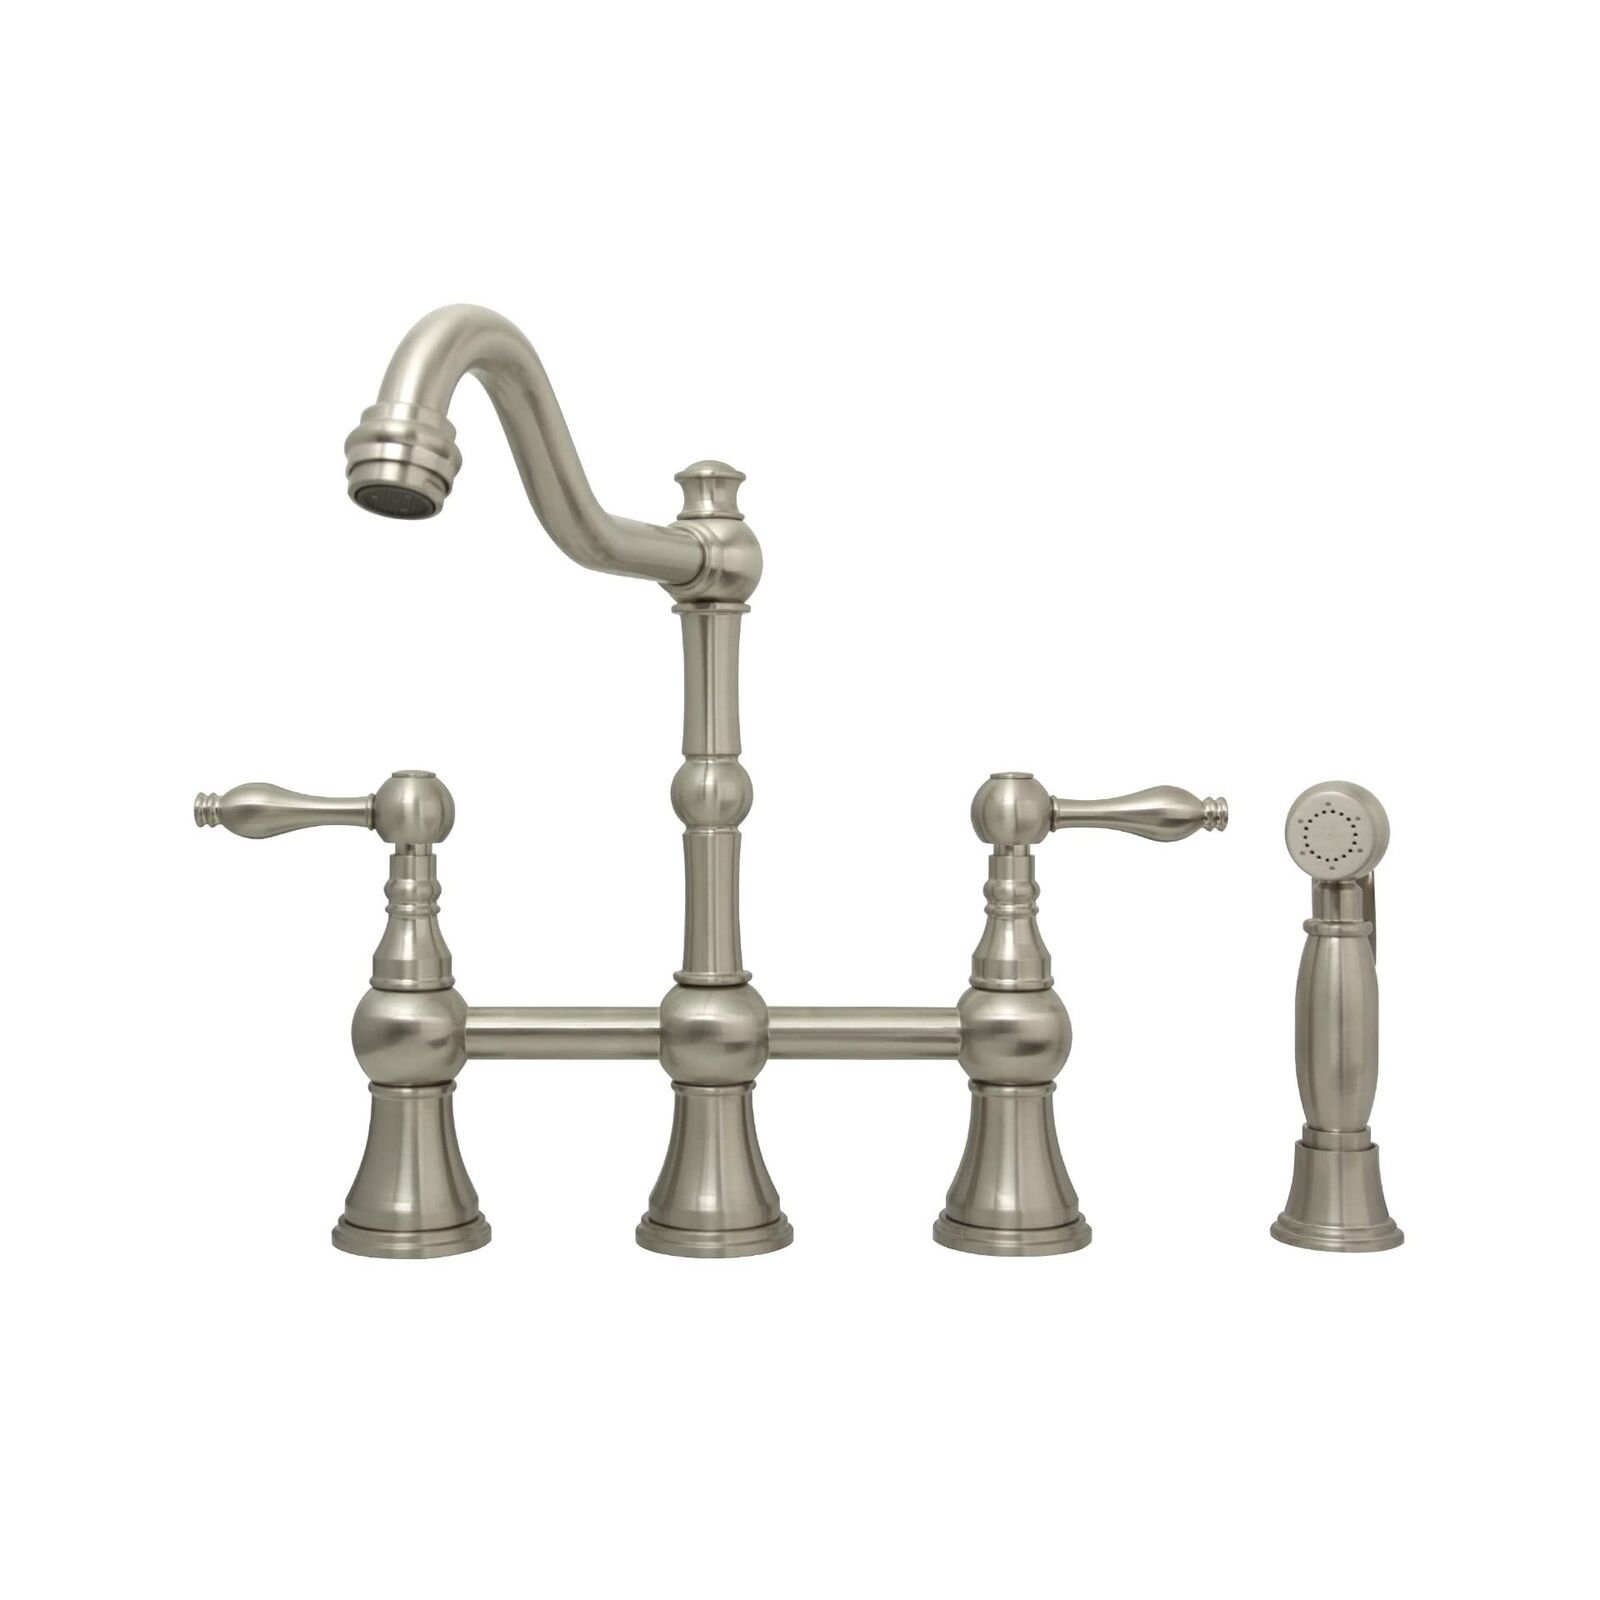 thinkstar Two-Handles Bridge Kitchen Faucet With Side Sprayer (Brushed Nickel)